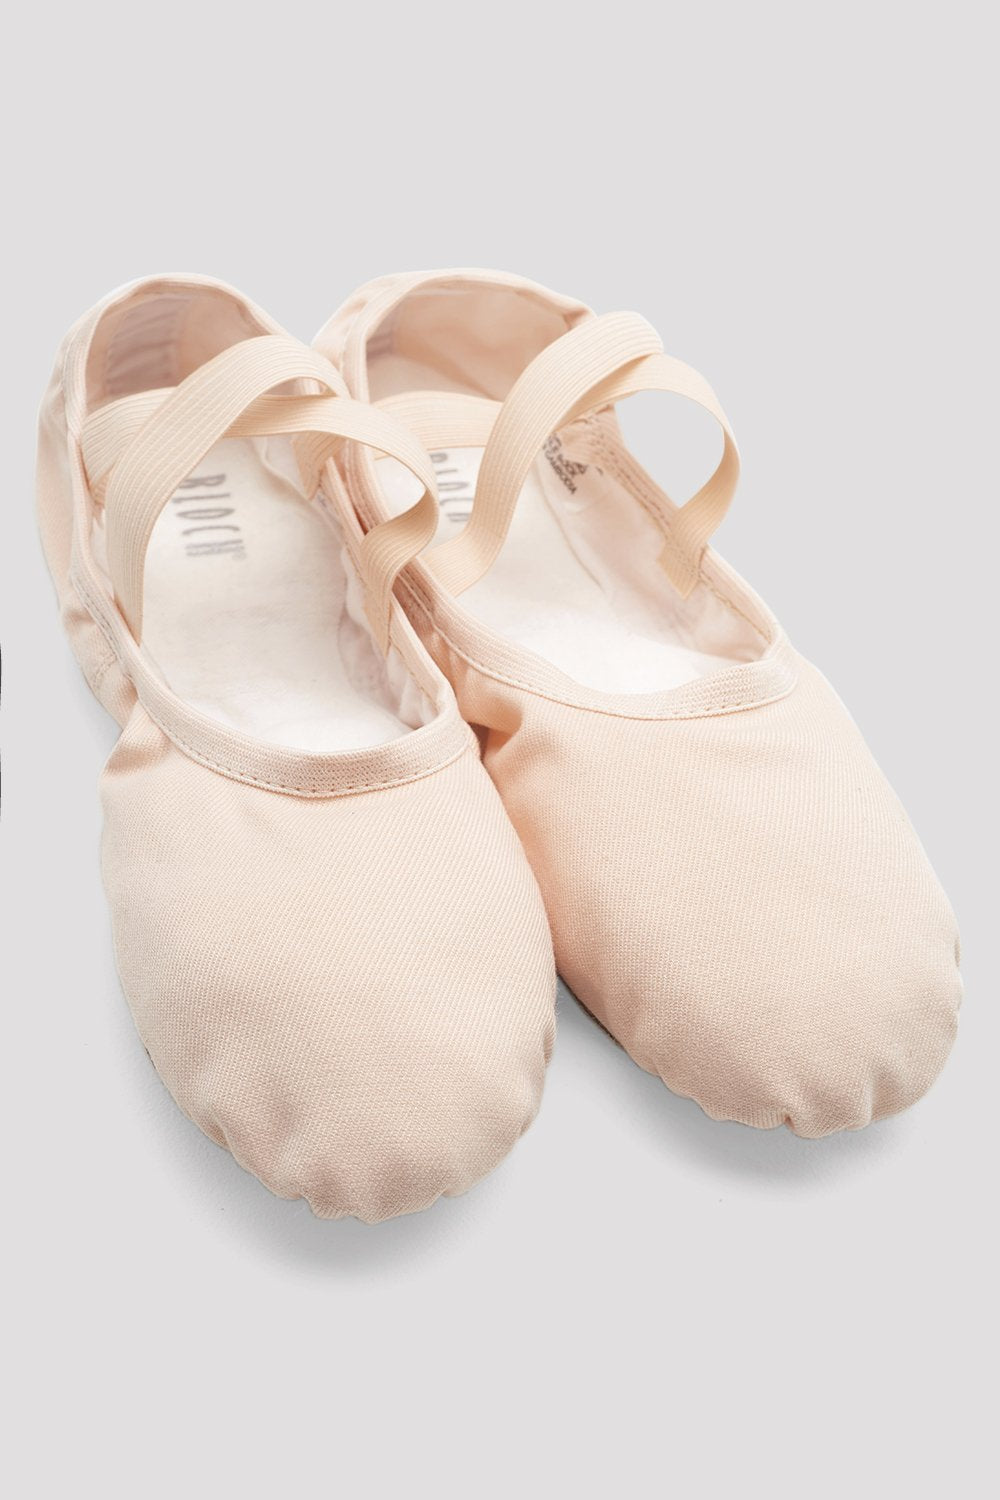 Adult Performa Ballet Shoe (Variety of Colors)